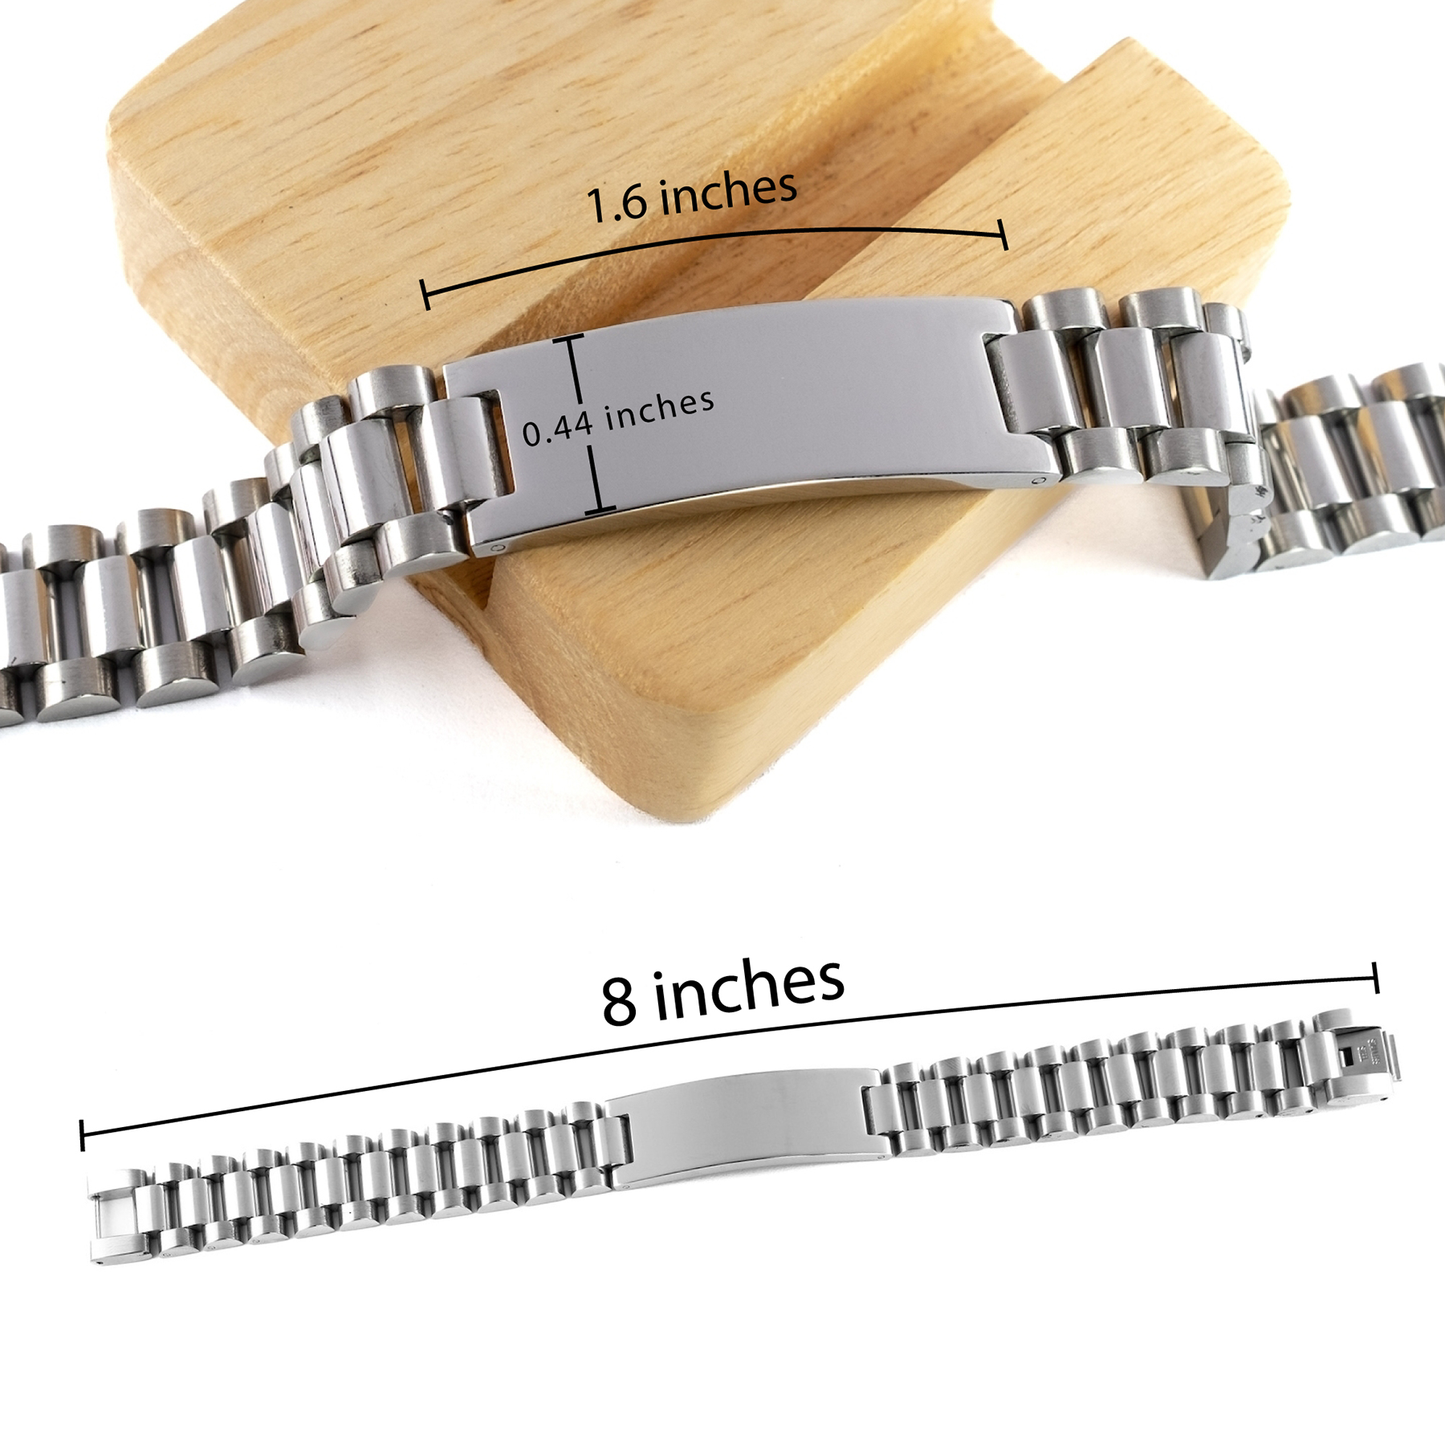 Mother Appreciation Gifts, I am grateful, thankful, and blessed, Thank You Ladder Stainless Steel Bracelet for Mother, Birthday Inspiration Gifts for Mother